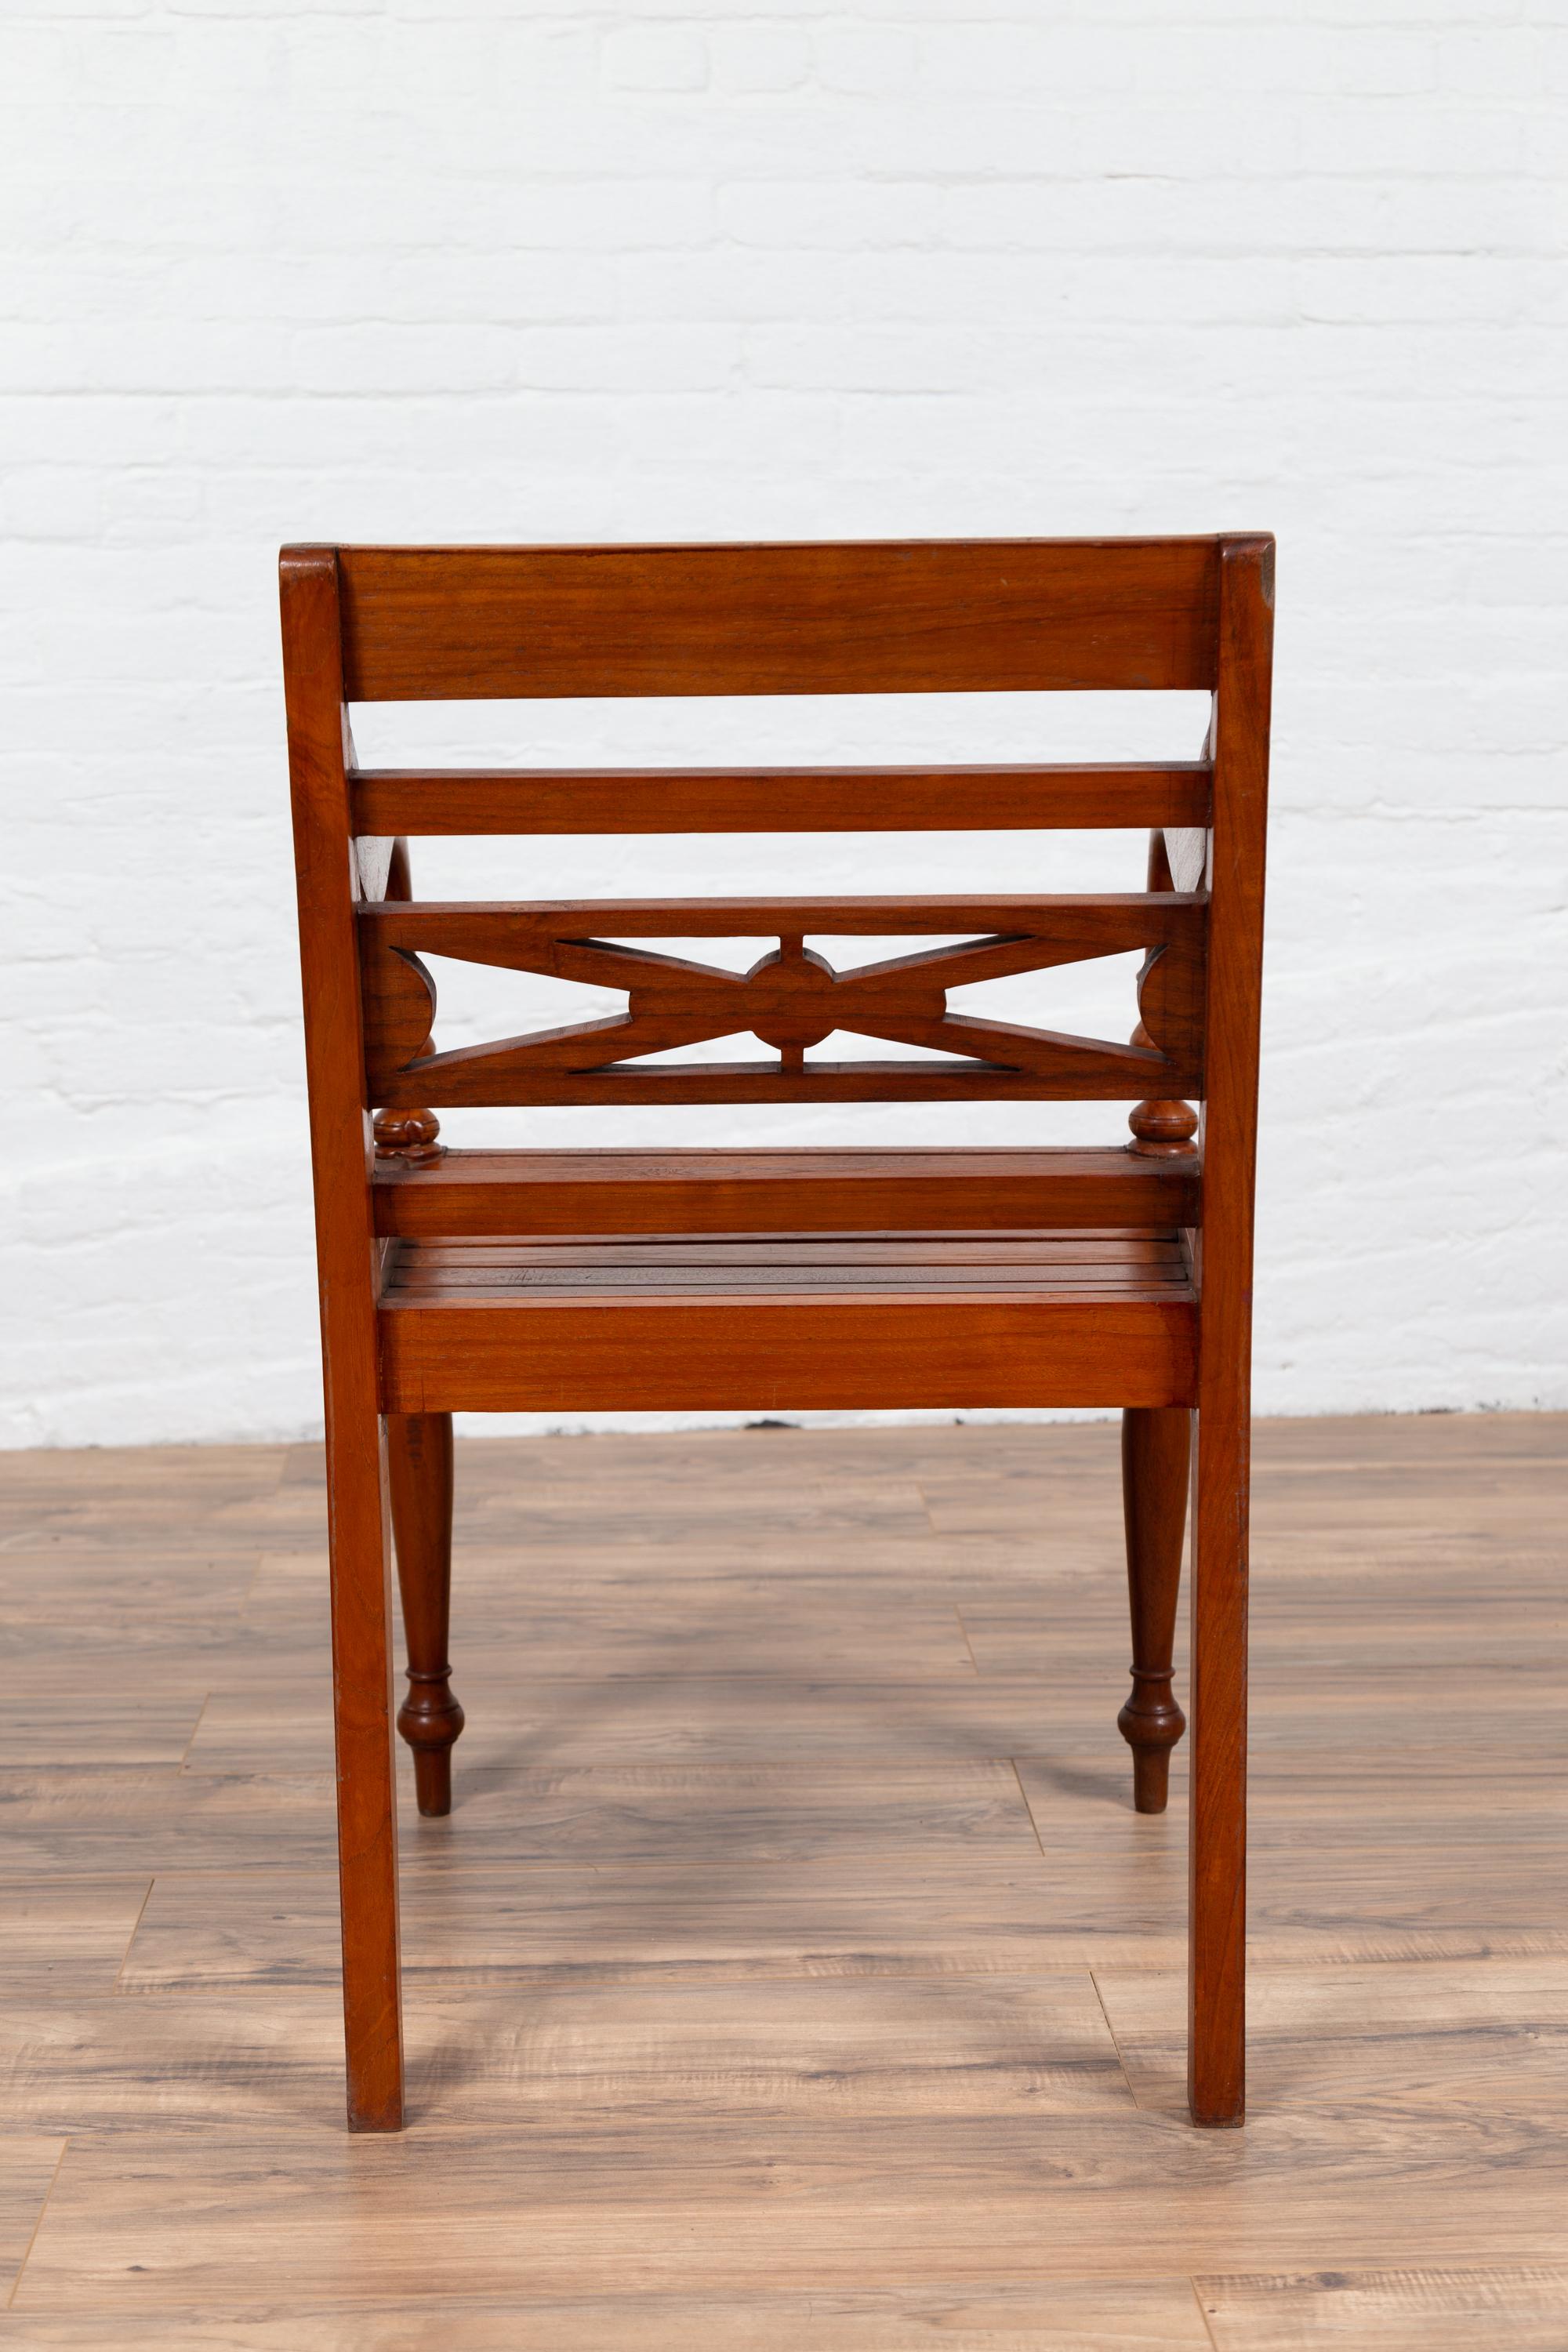 Early 20th Century Captain's Chair from Bali with Slatted Wood and Loop Arms For Sale 3